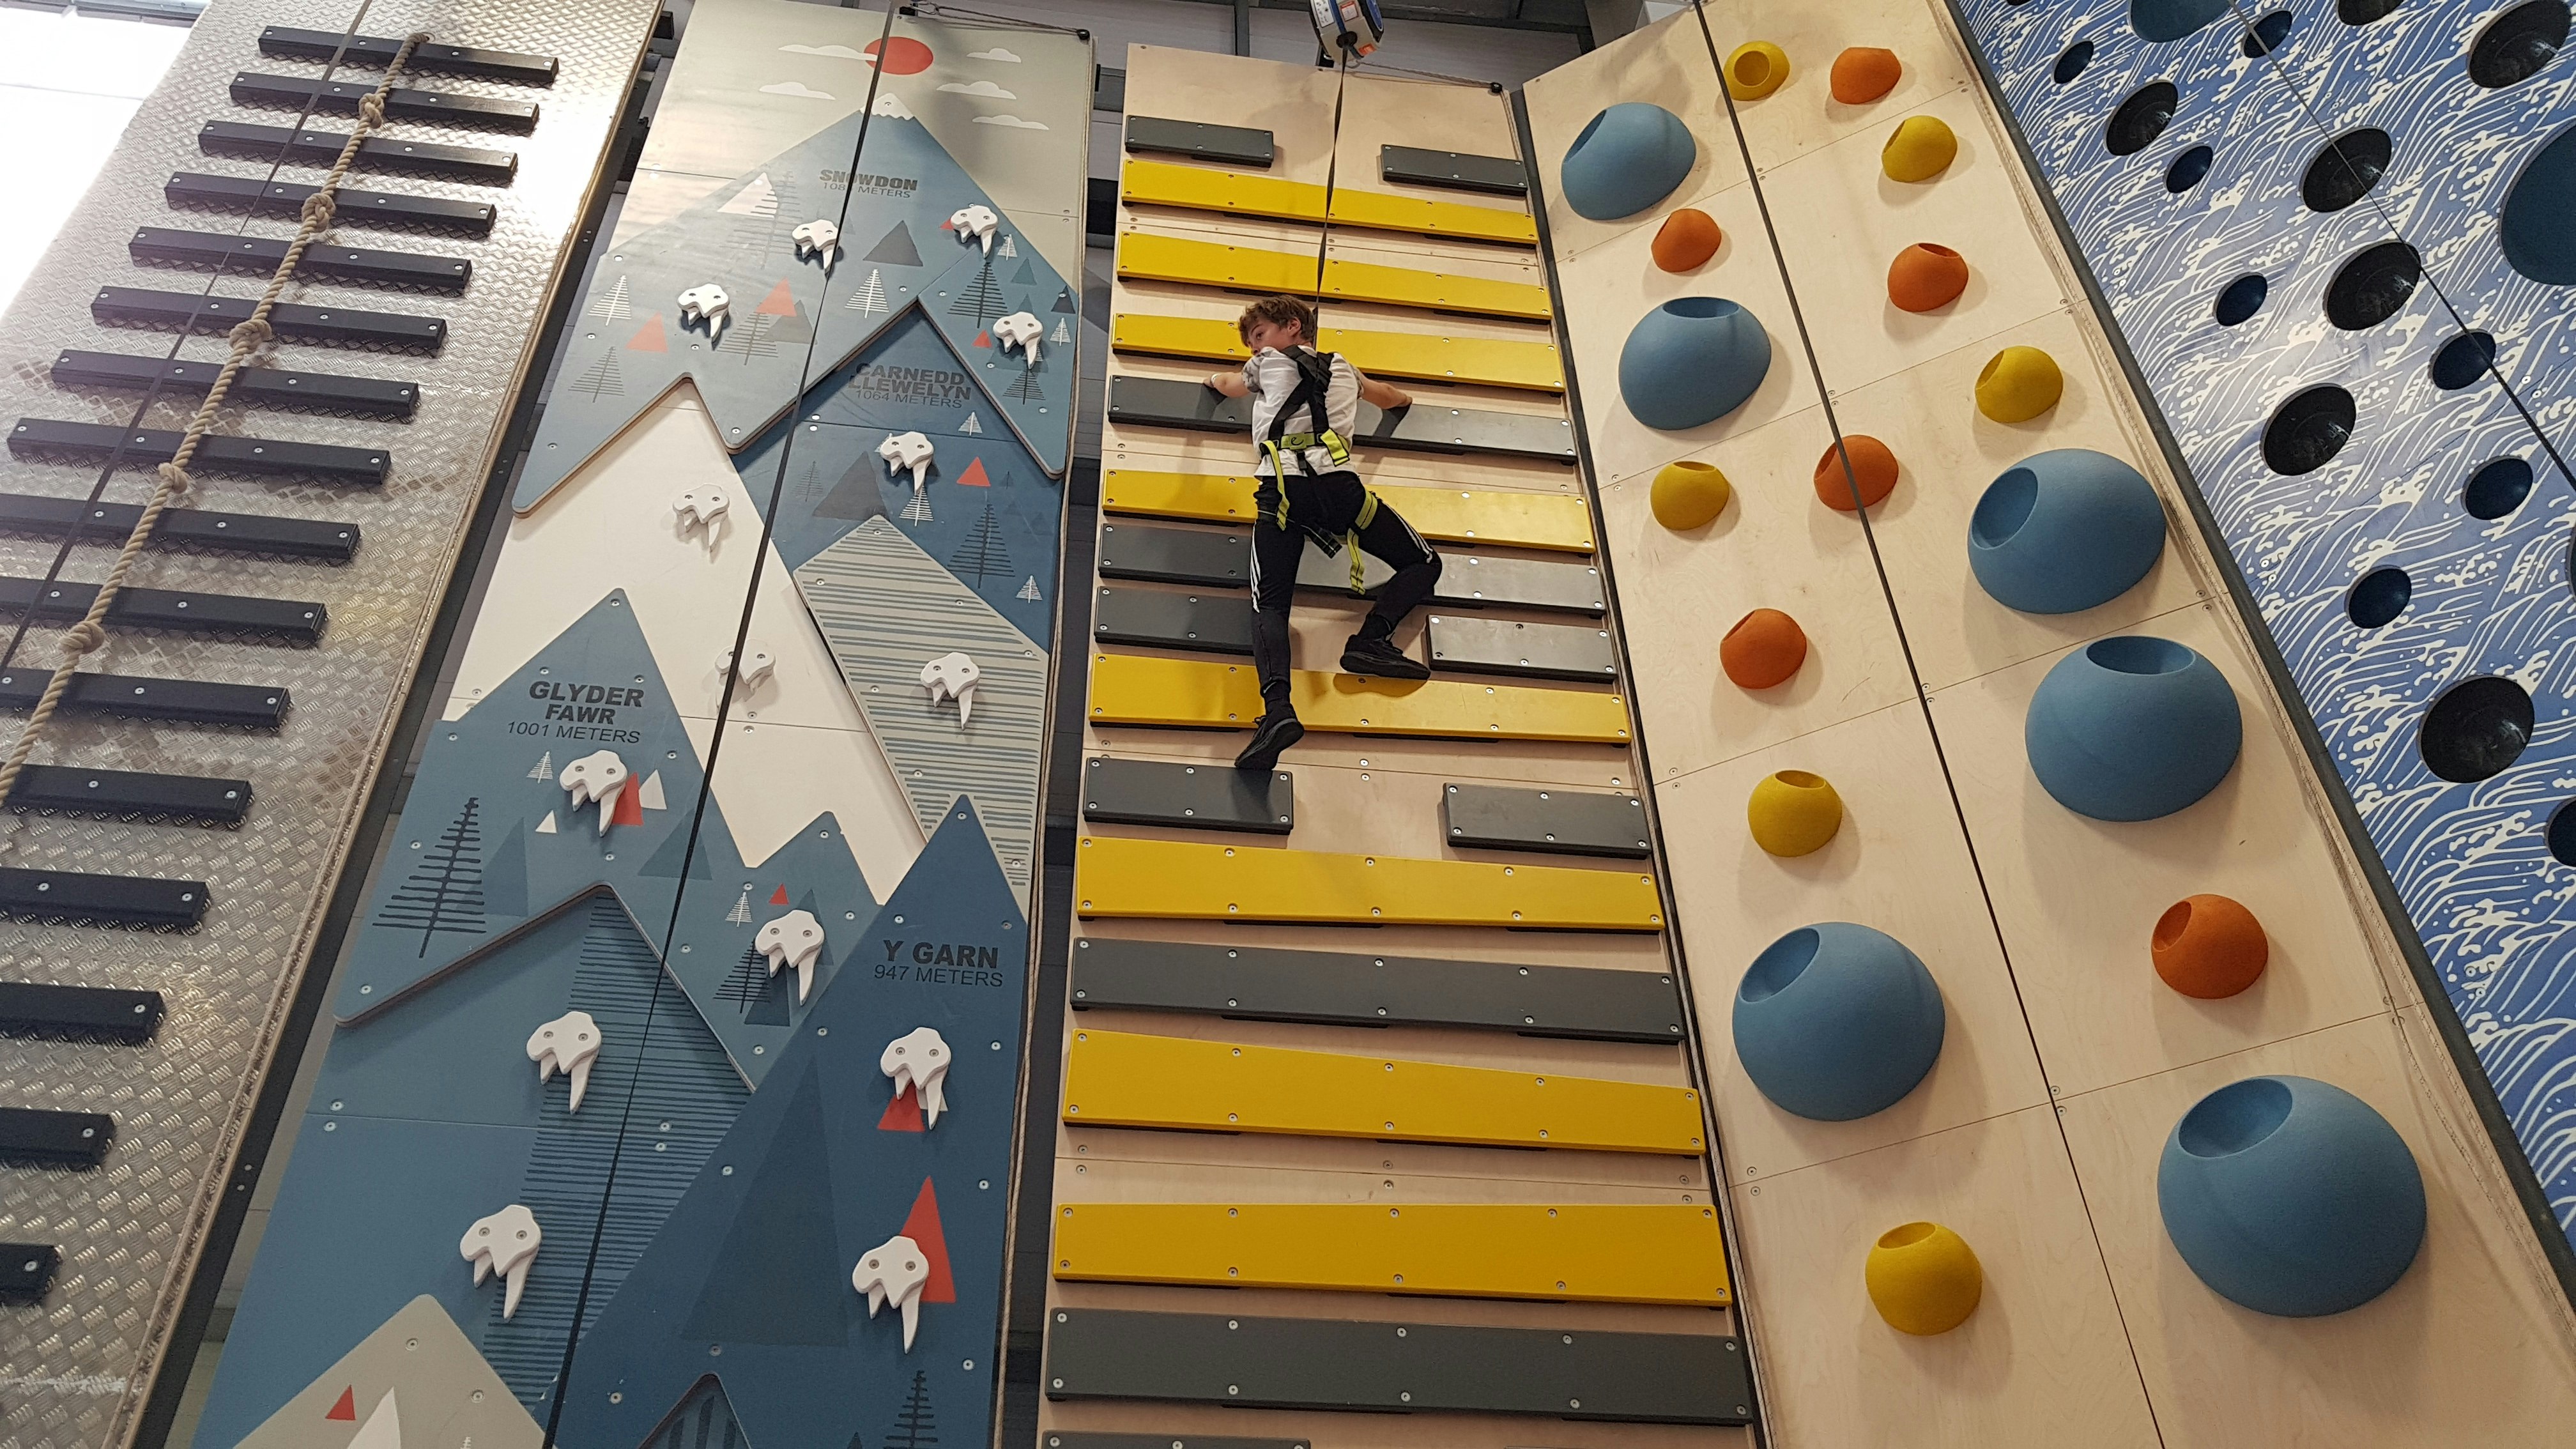 A pre-teen boy in black track pants and a white shirt with a climbing harness and belay rope on climbs yellow and black planks next to a more technical blue and white climbing wall designed to look like jagged mountain peaks.